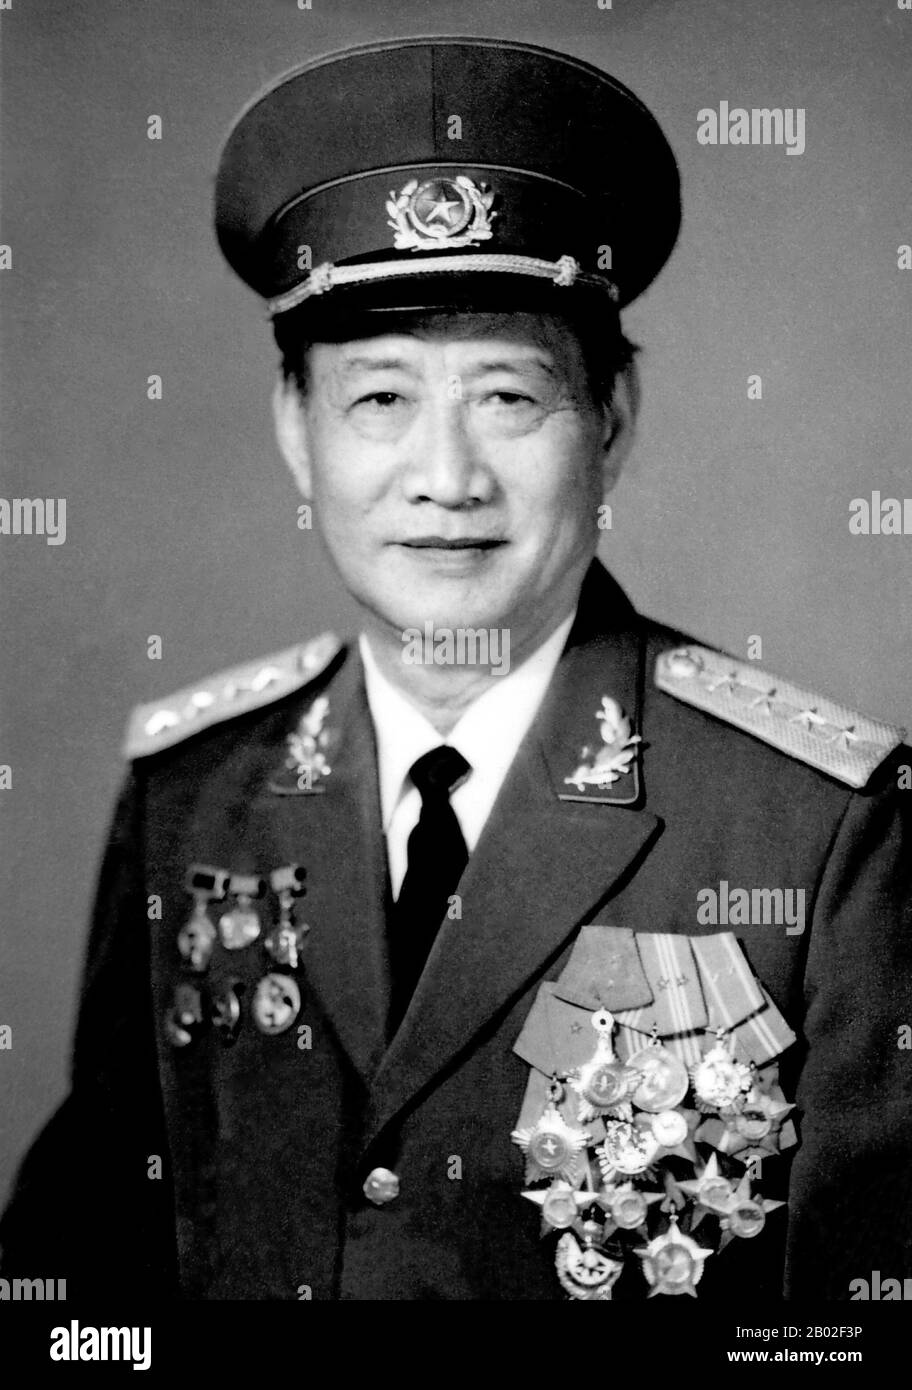 Hoàng Văn Thái (1 May 1915 – 2 July 1986), born Hoàng Văn Xiêm, was a Vietnamese communist military and political figure. His hometown was Tây An, Tiền Hải District, Thái Bình Province.  He was Chief of Staff in the Battle of Điện Biên Phủ. Subsequently during the Tết Offensive, he was the most senior North Vietnamese Officer in South Vietnam. Stock Photo